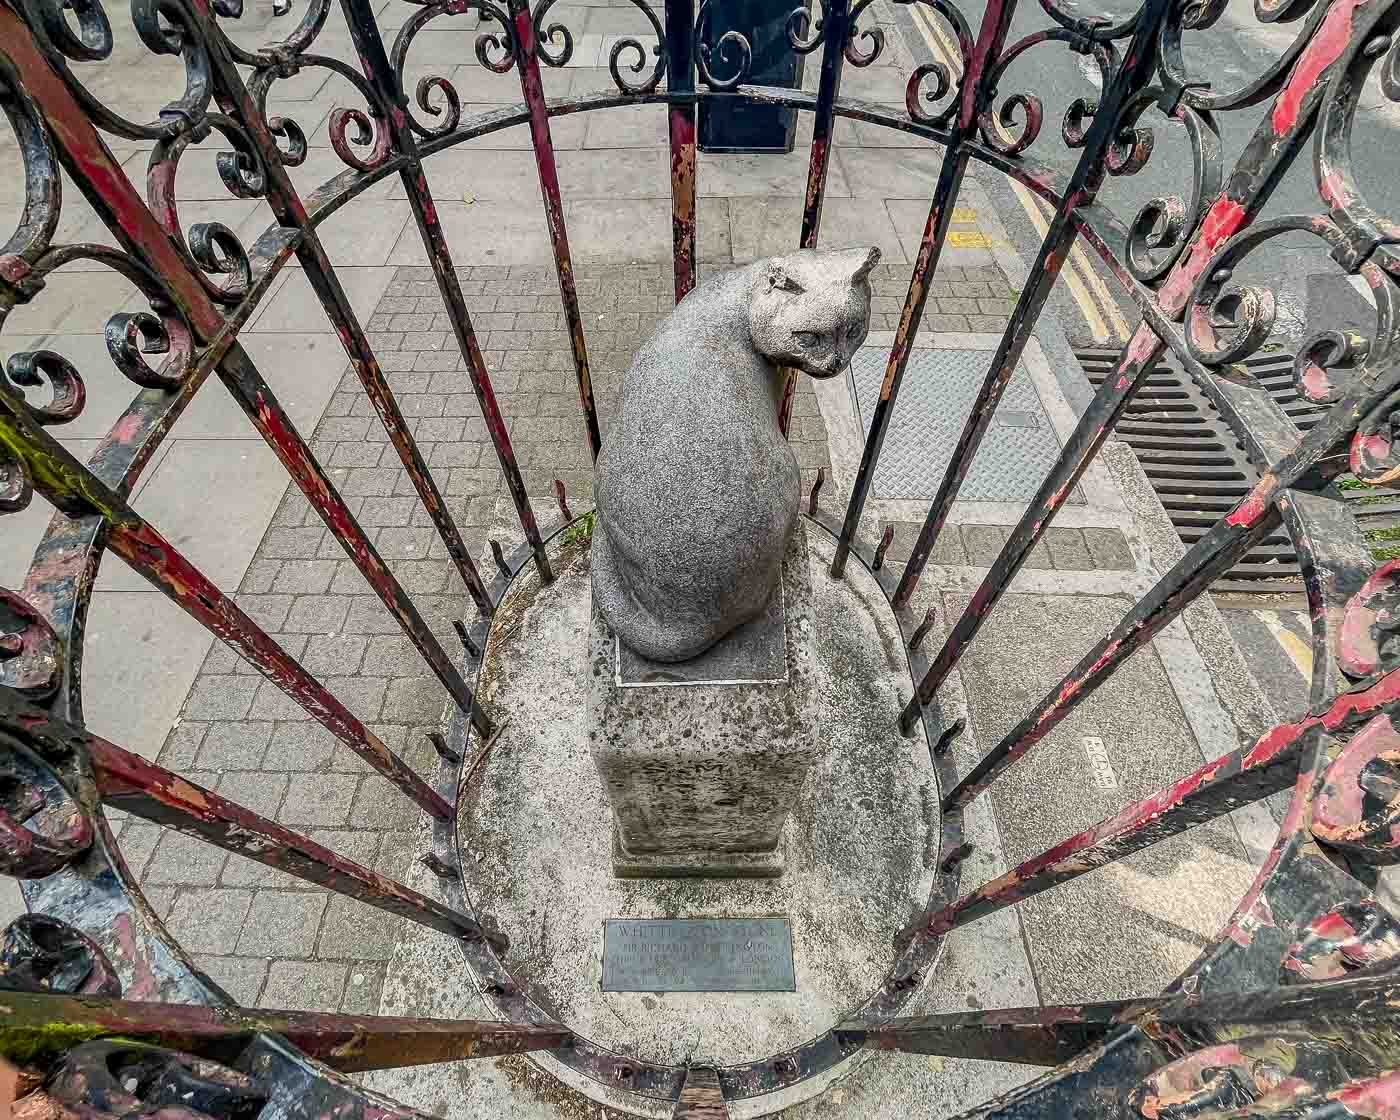 Every time I go to London, I try to find something new or unusual to see and write about here. During my last few trips in the summer of 2024, I decided to focus on the cats of London, and this is how I ended up taking a subway ride to Archway just to see a cat statue. 